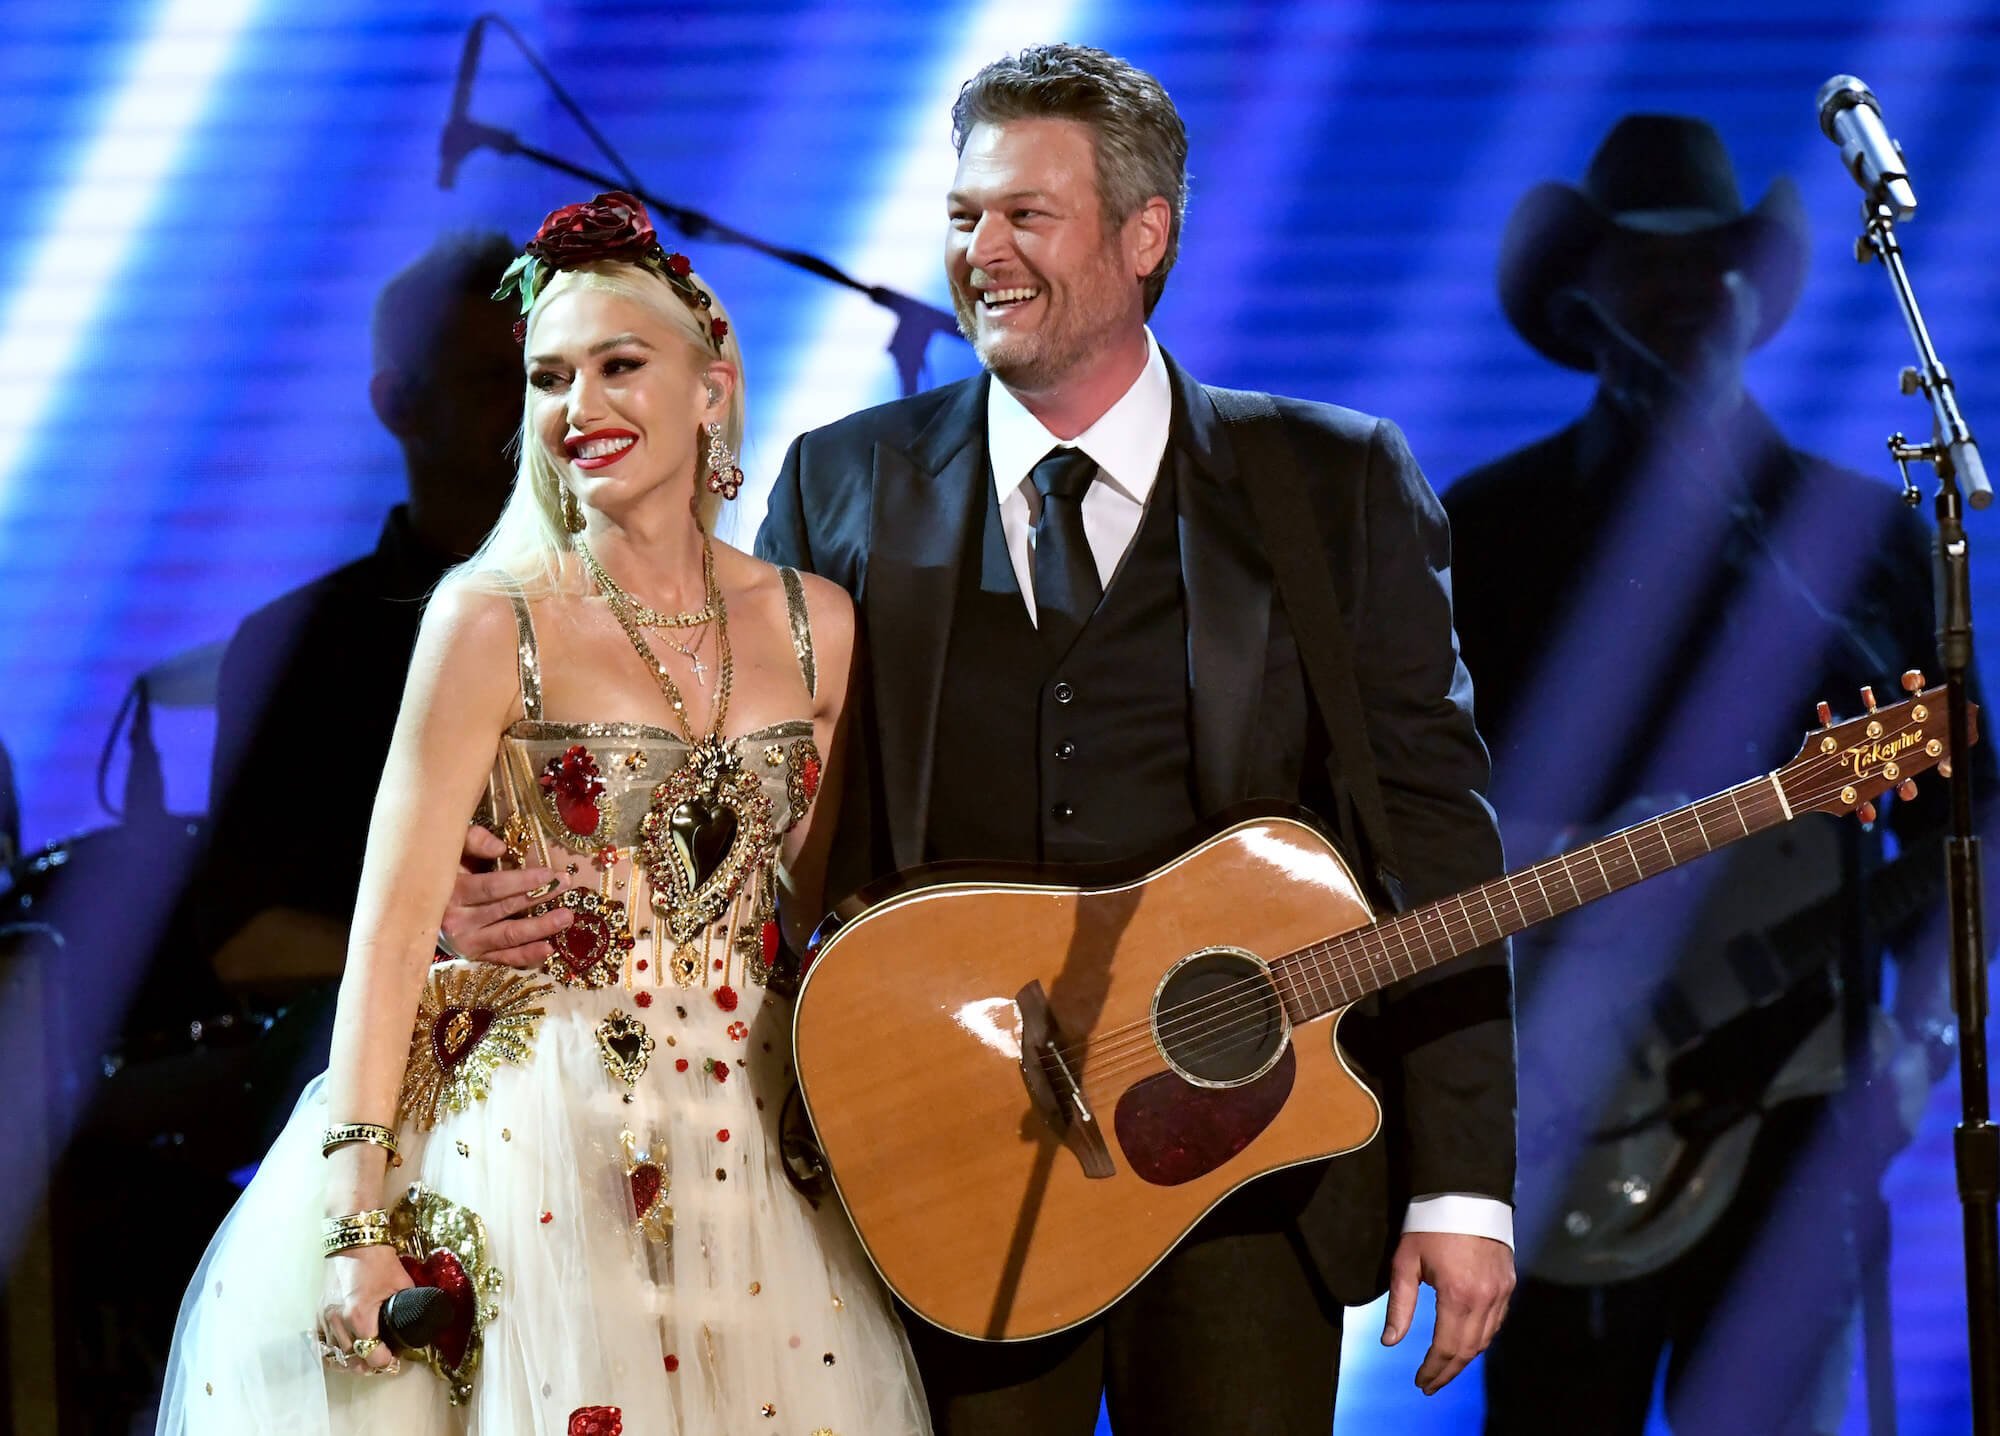 Gwen Stefani wearing a dress while standing next to Blake Shelton in a suit. They're smiling on stage. Shelton has a guitar strapped around his body.